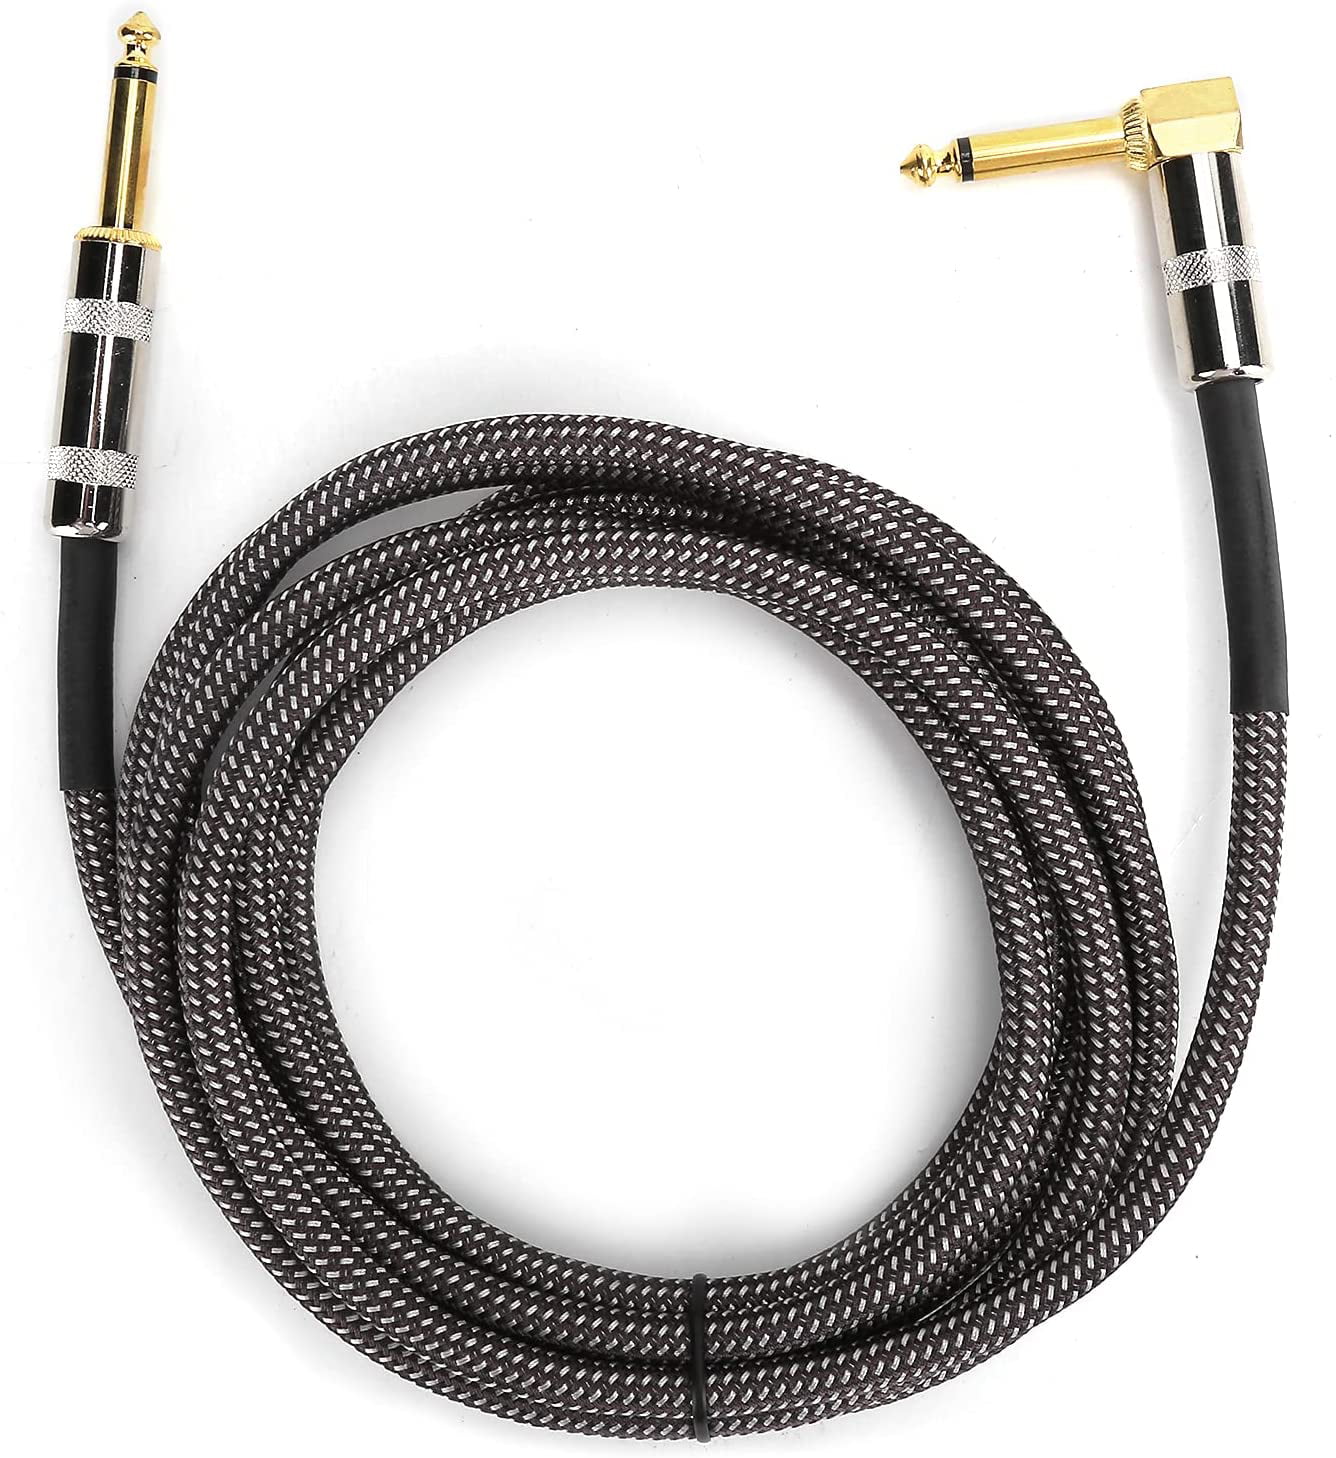 20ft Premium Electric Guitar Bass Cable Musical Instrument AMP Cord 1/4 Inch 2pc 